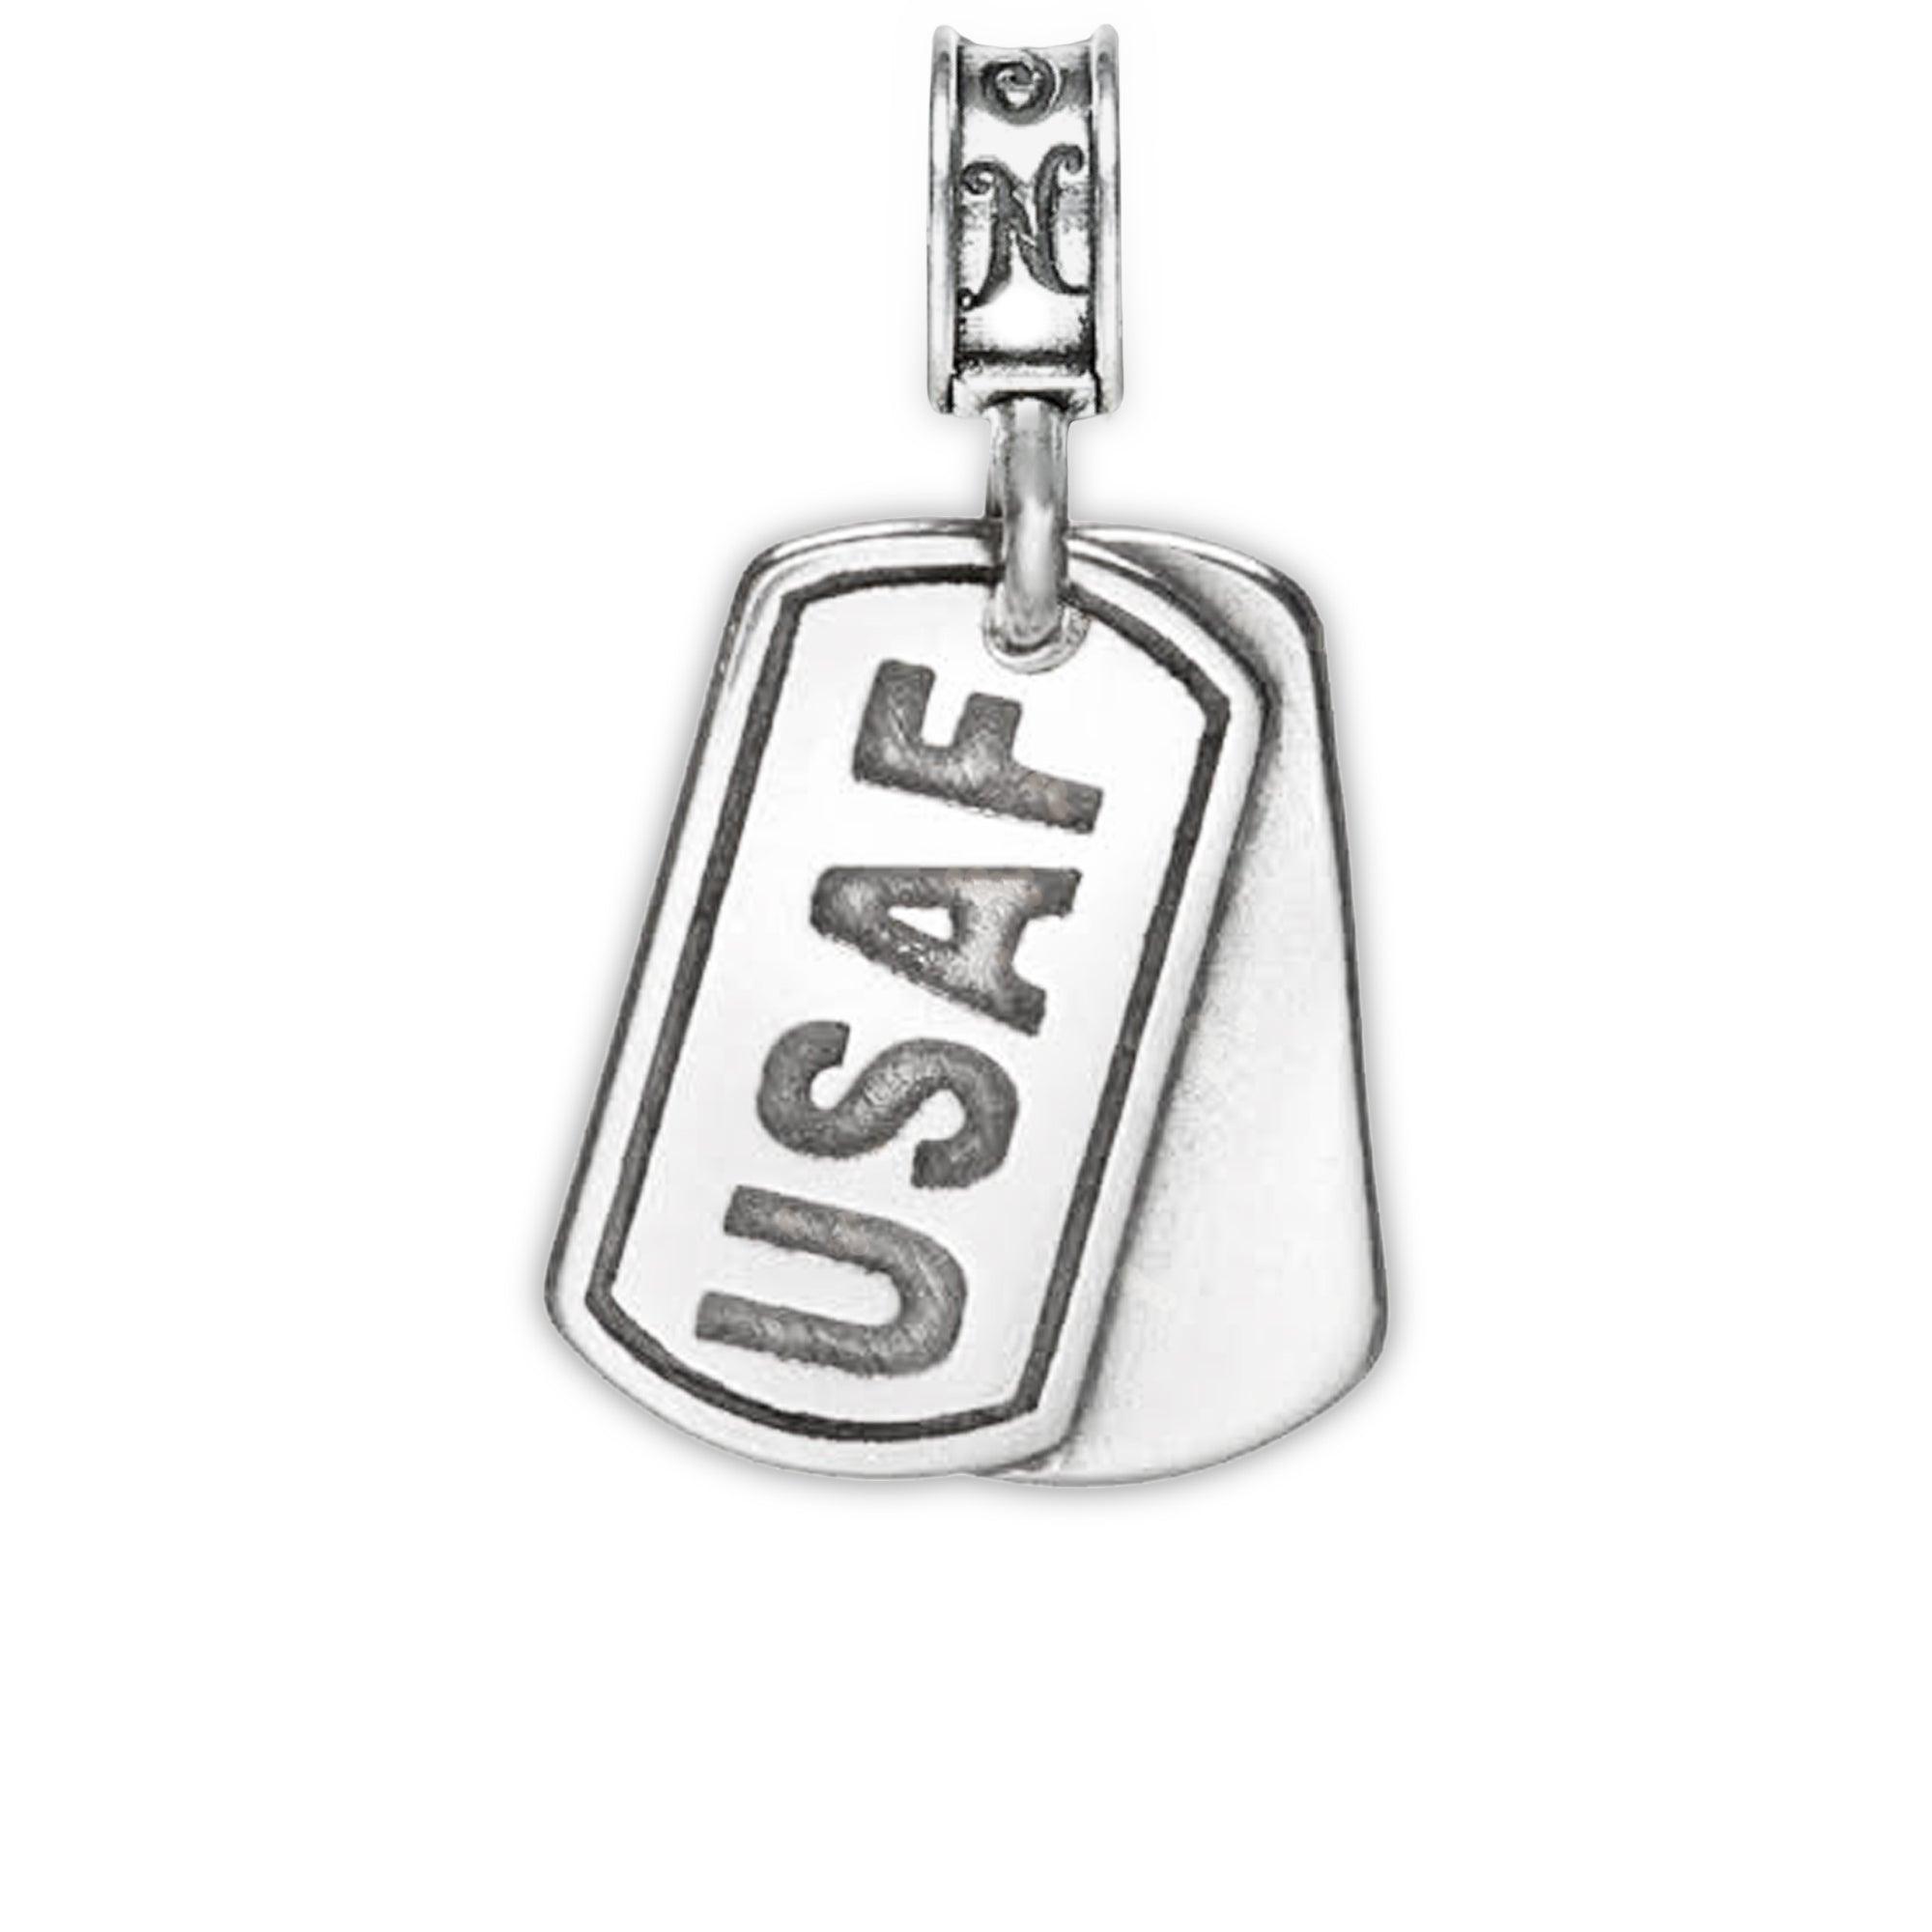 Military Jewelry, Military Charms, Military Gifts, USAF, United States Air Force, USAF Dog Tag, United States Air Force Dog Tag